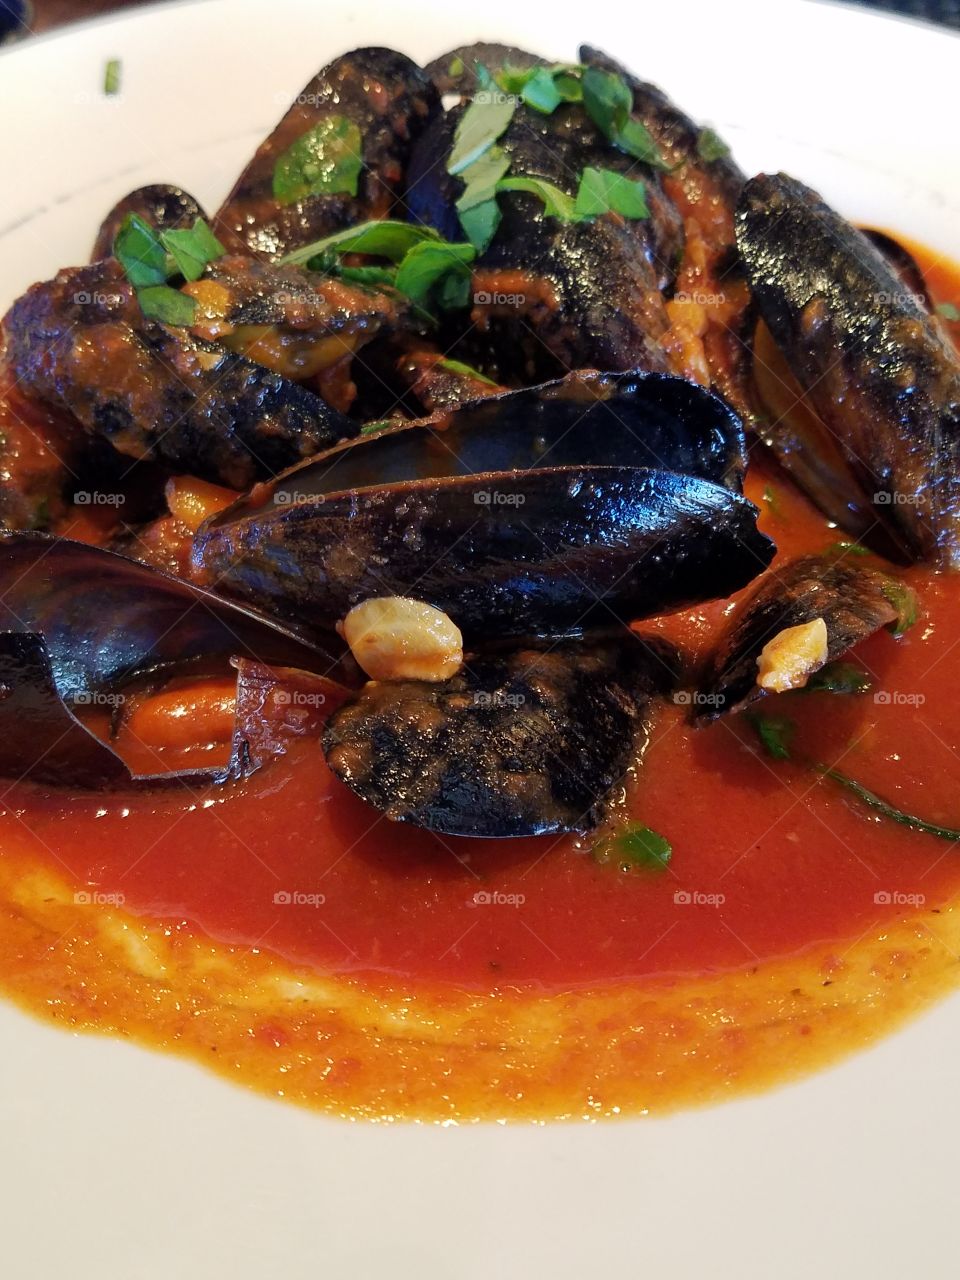 Italian Restaurant Mussels in red sauce seafood